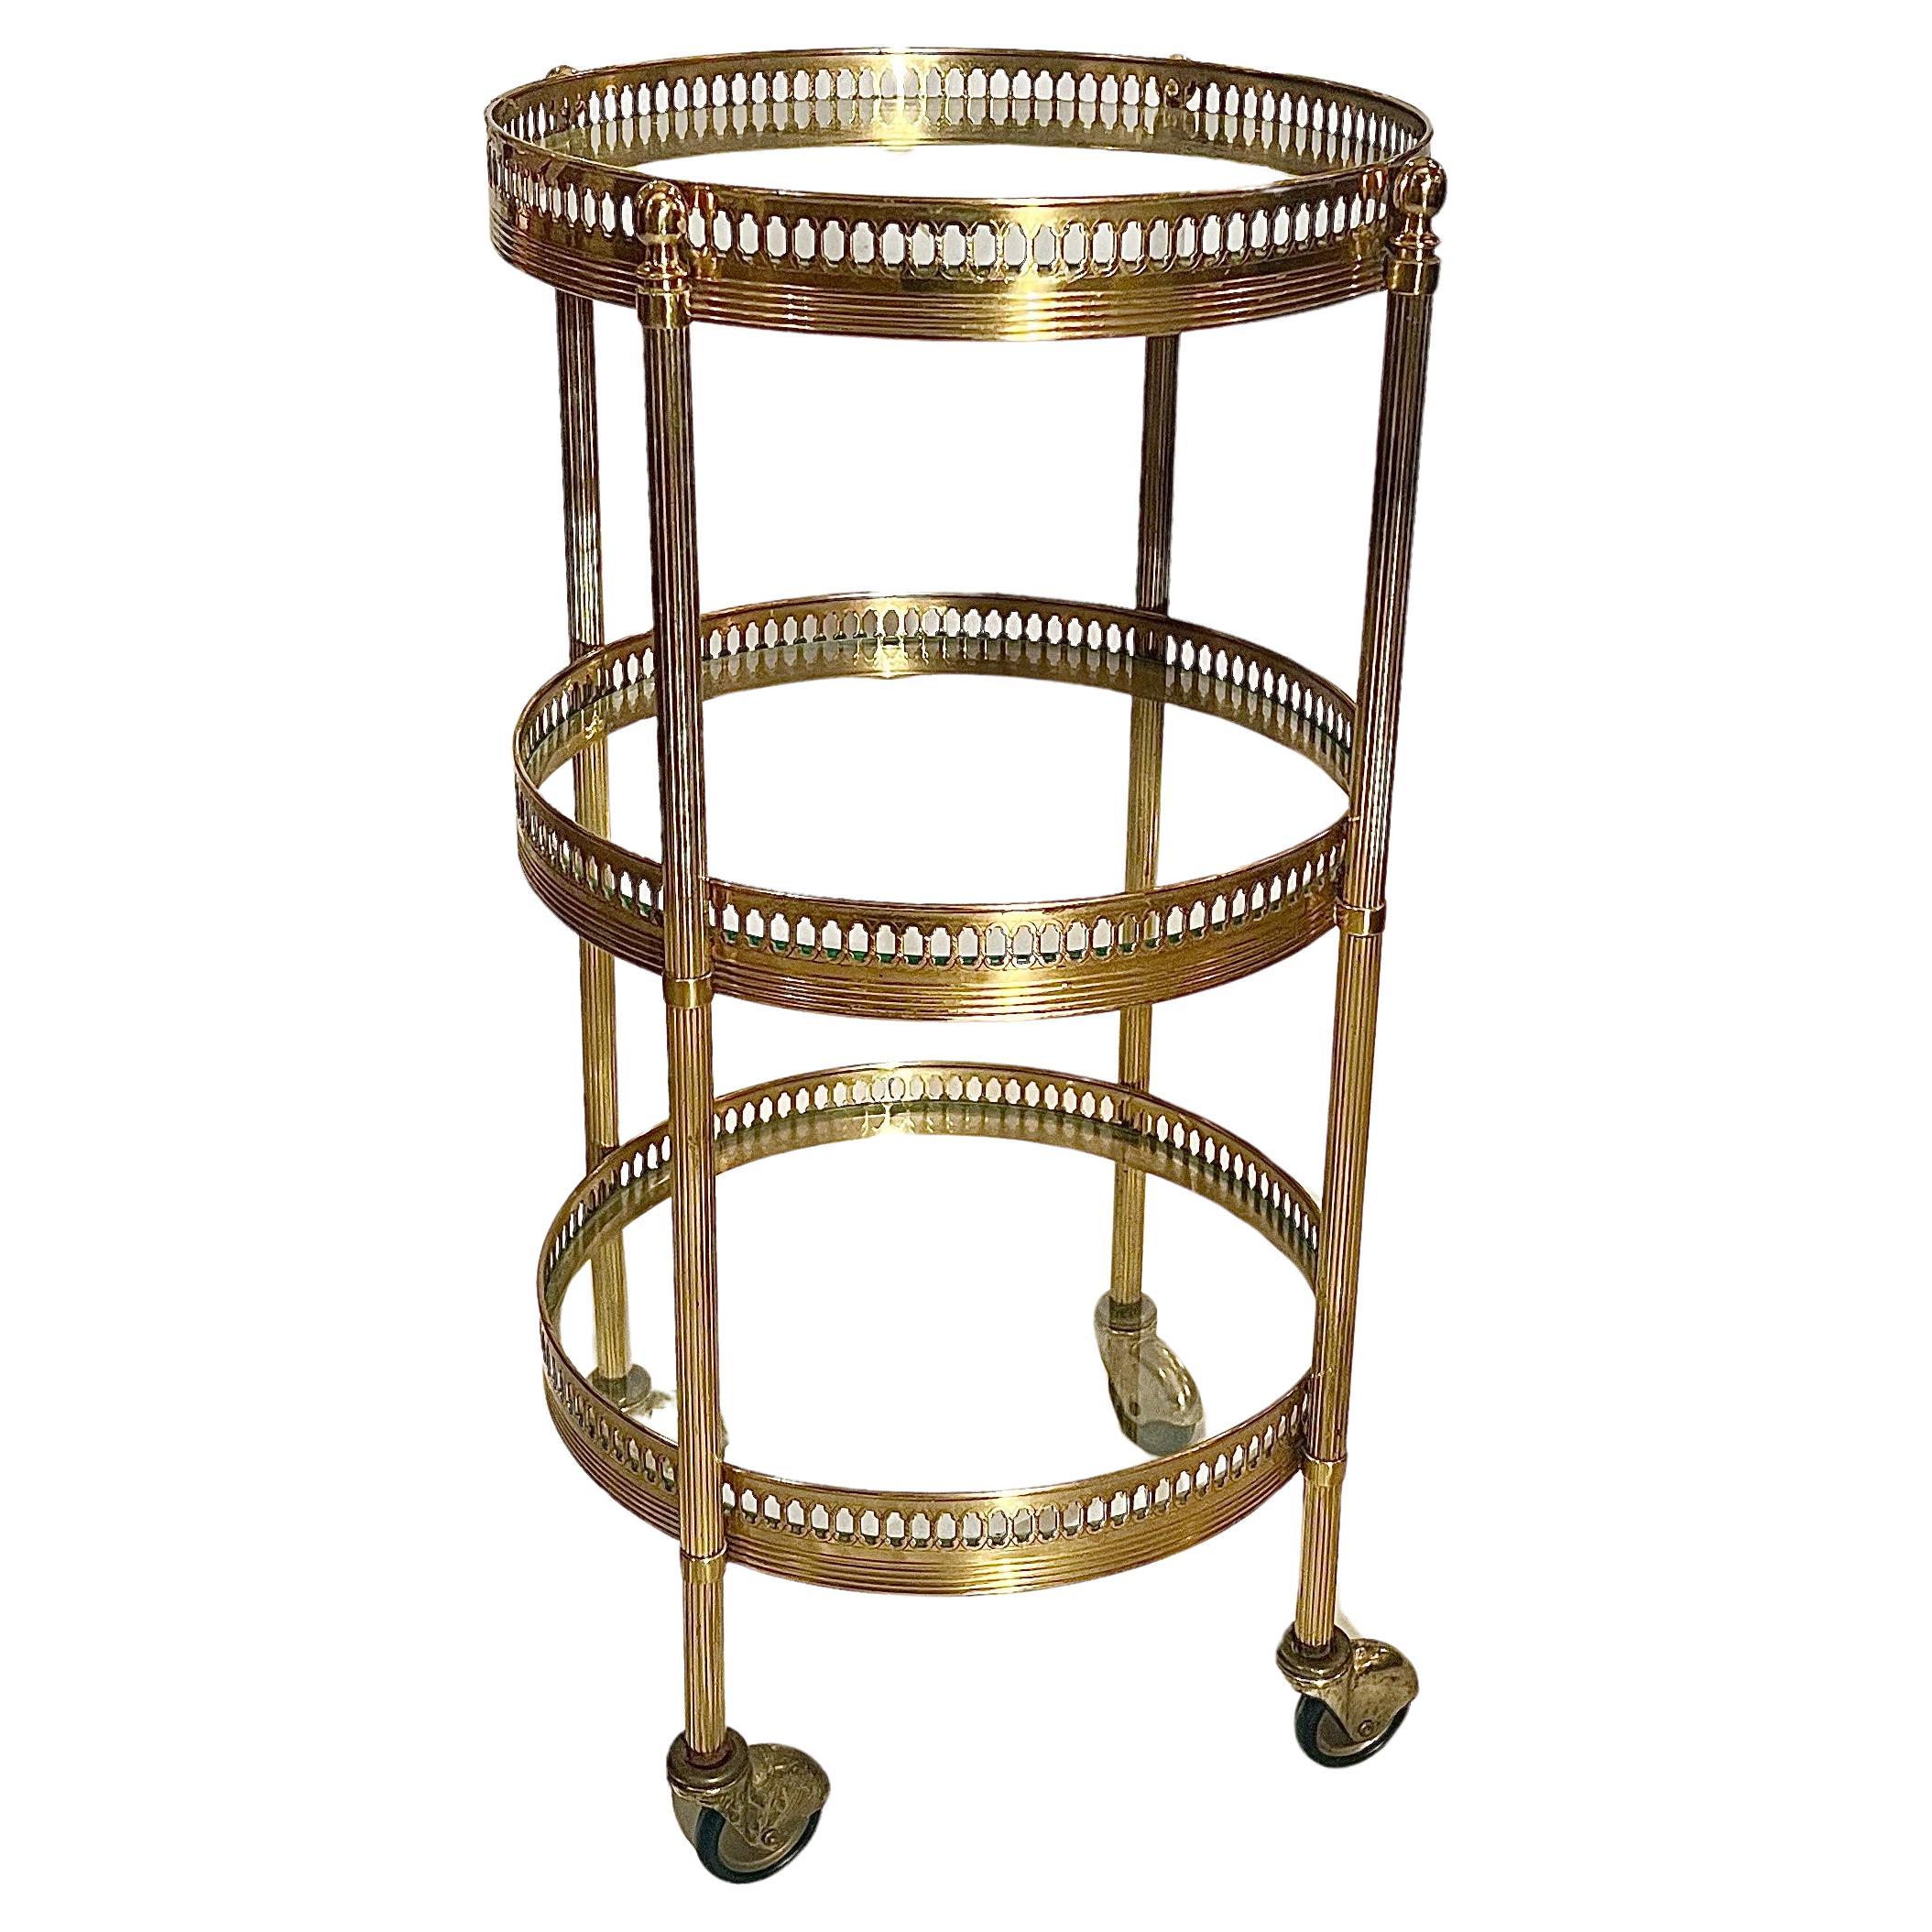 Antique English Polished Brass and Glass 3 Tier Bar Cart, Circa 1920.